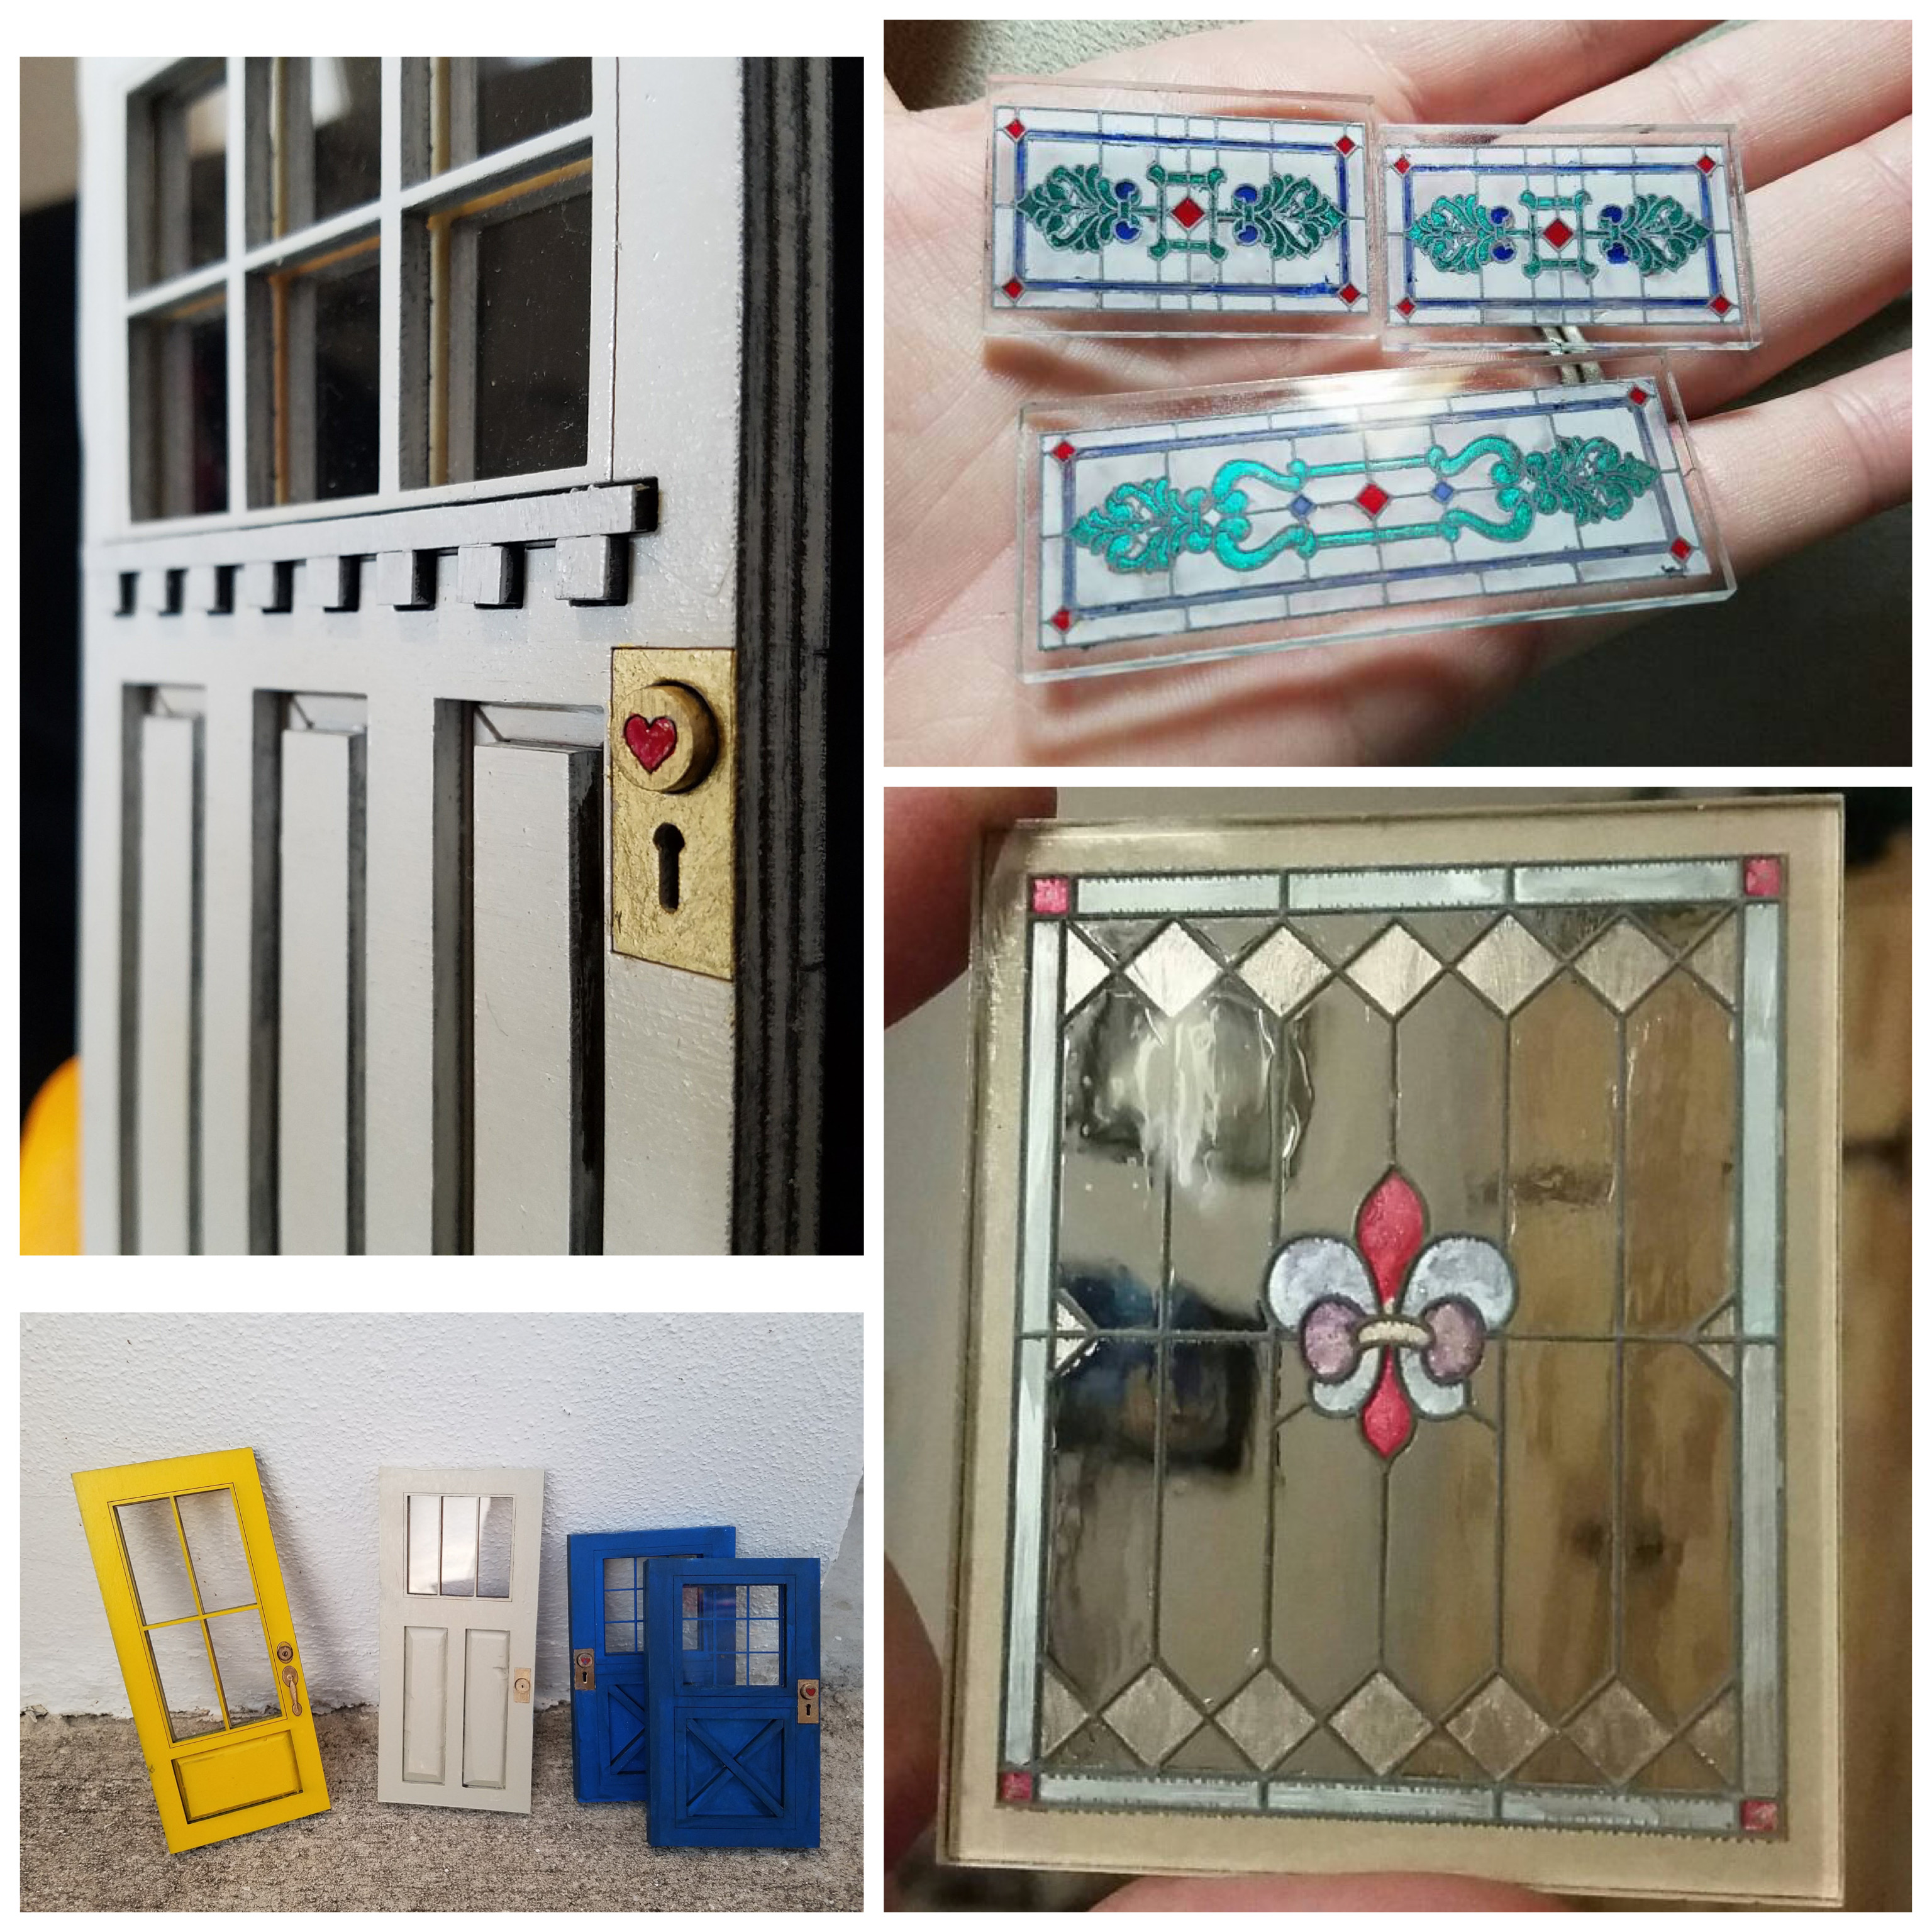 minature stained glass windows and dollhouse-sized doors, one with a heart painted on the handle